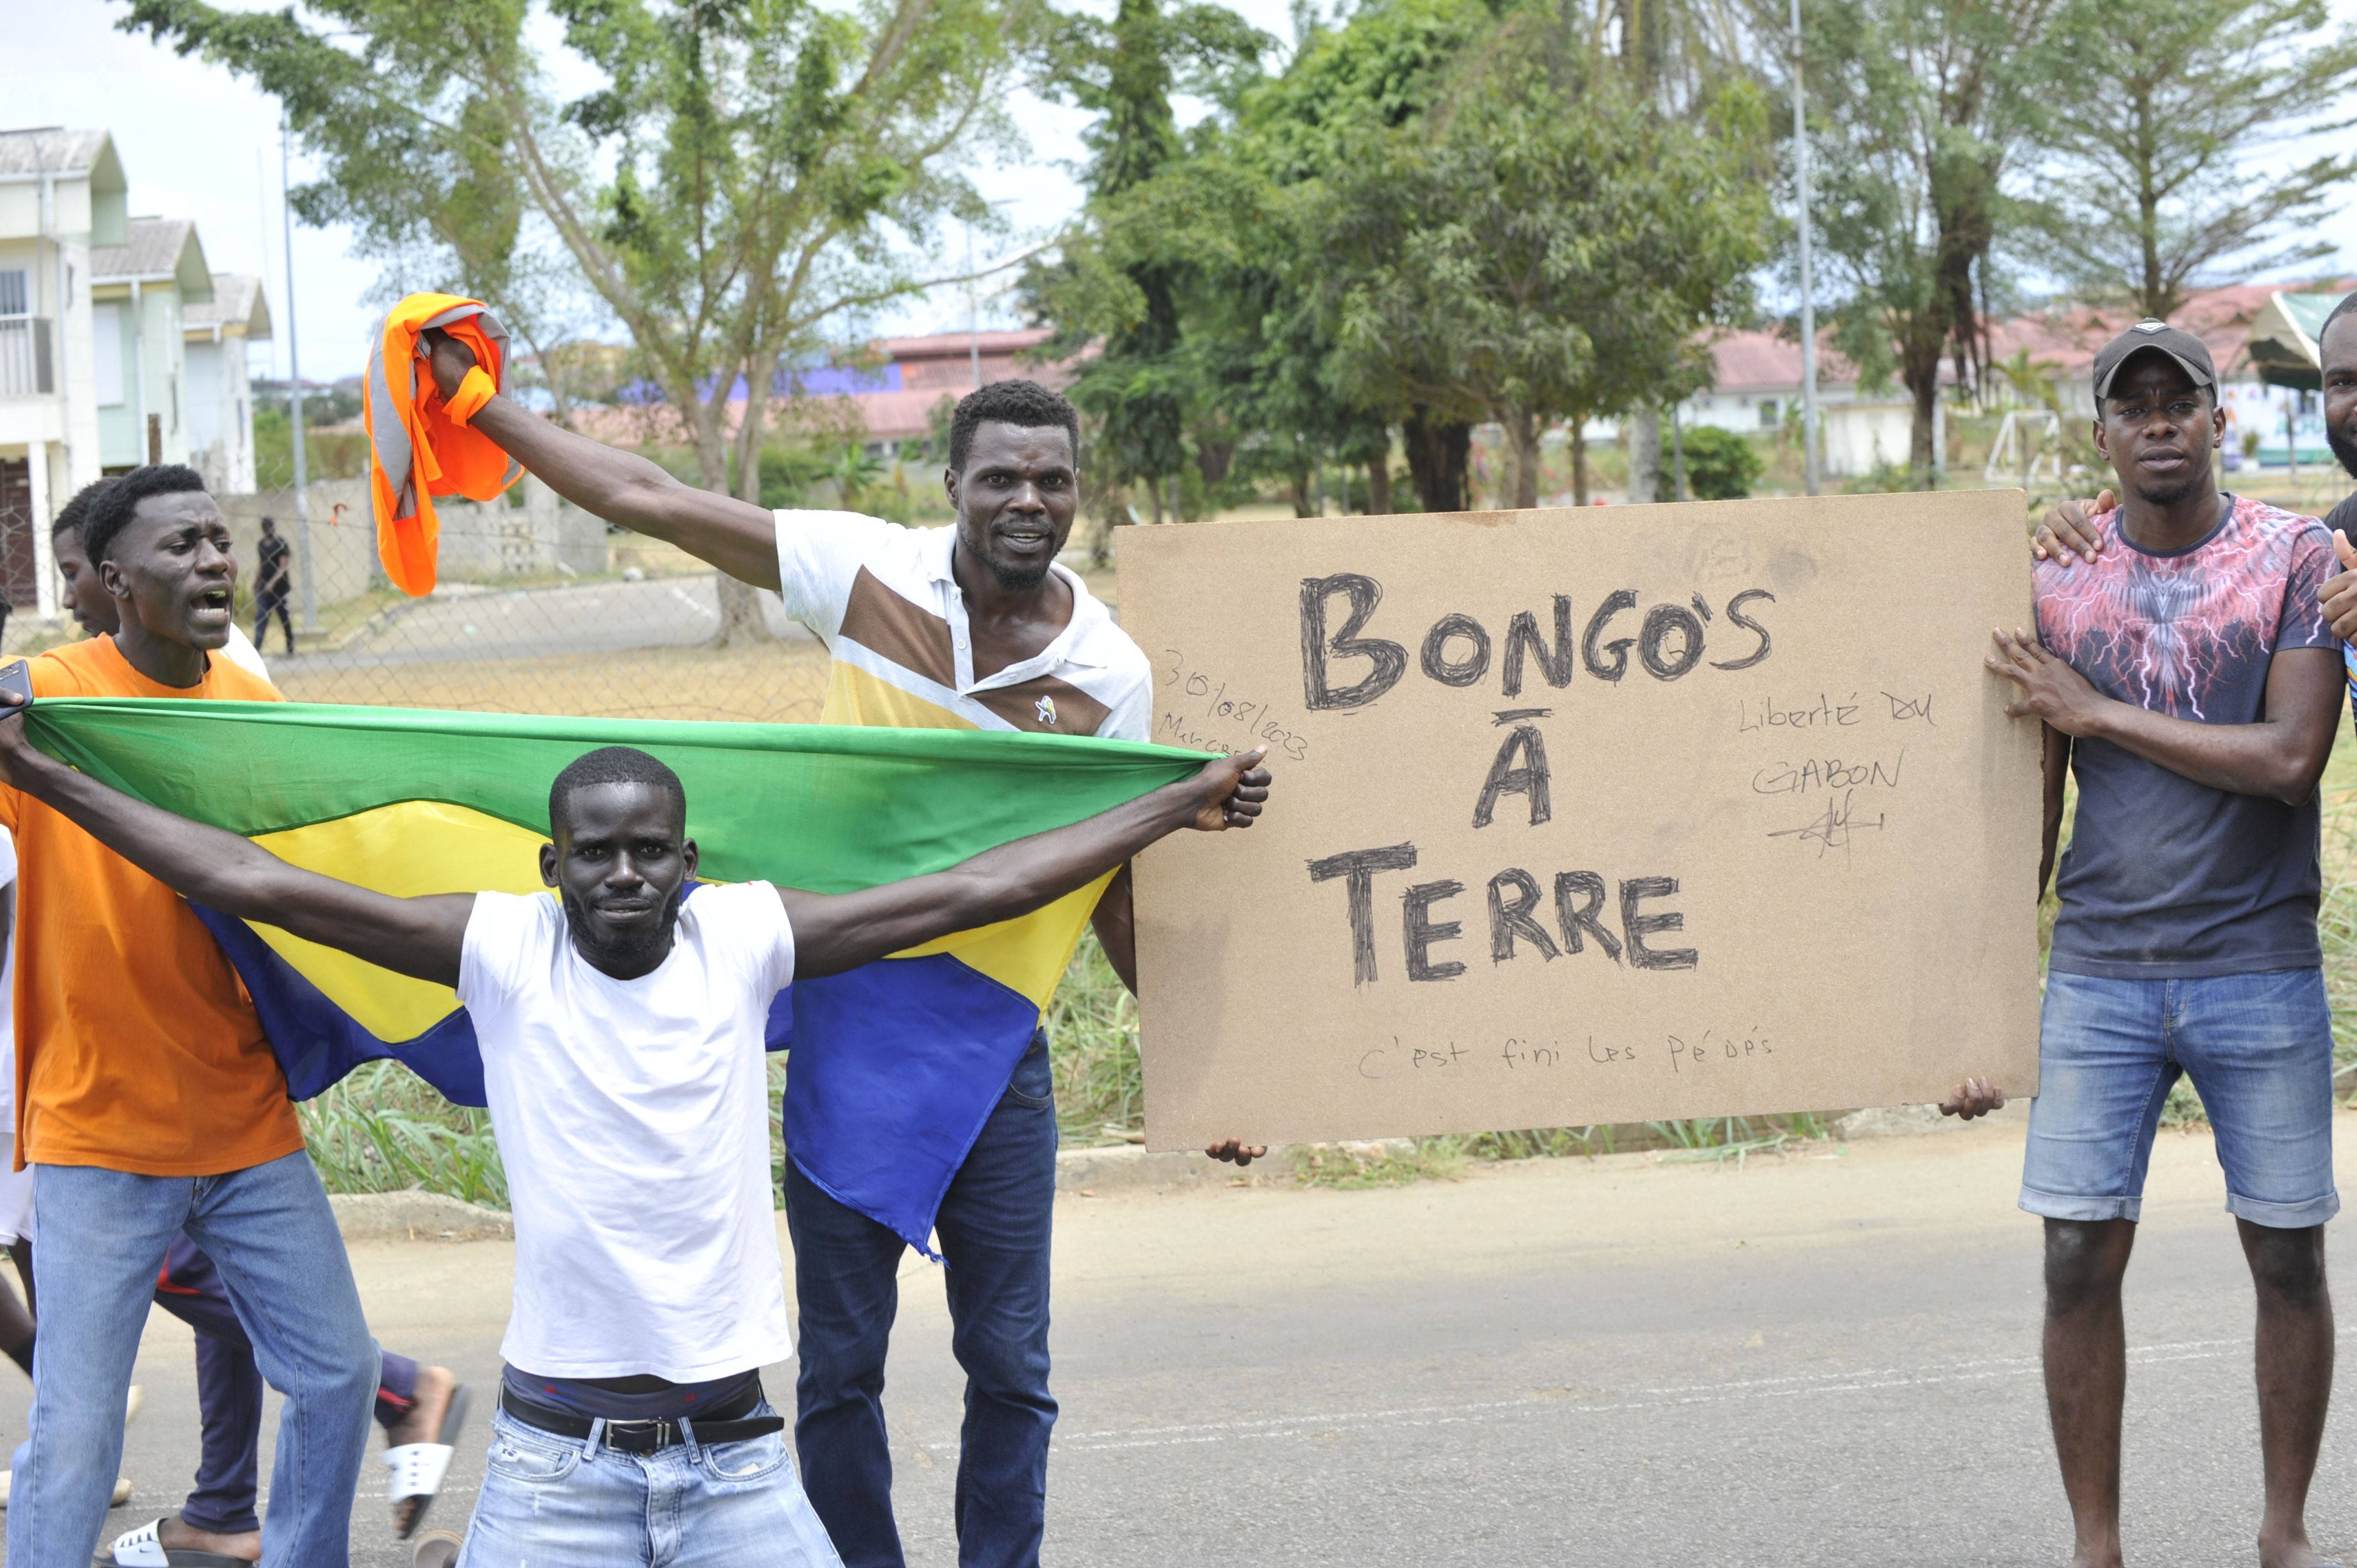 Residents in Gabon celebrate the apparent coup